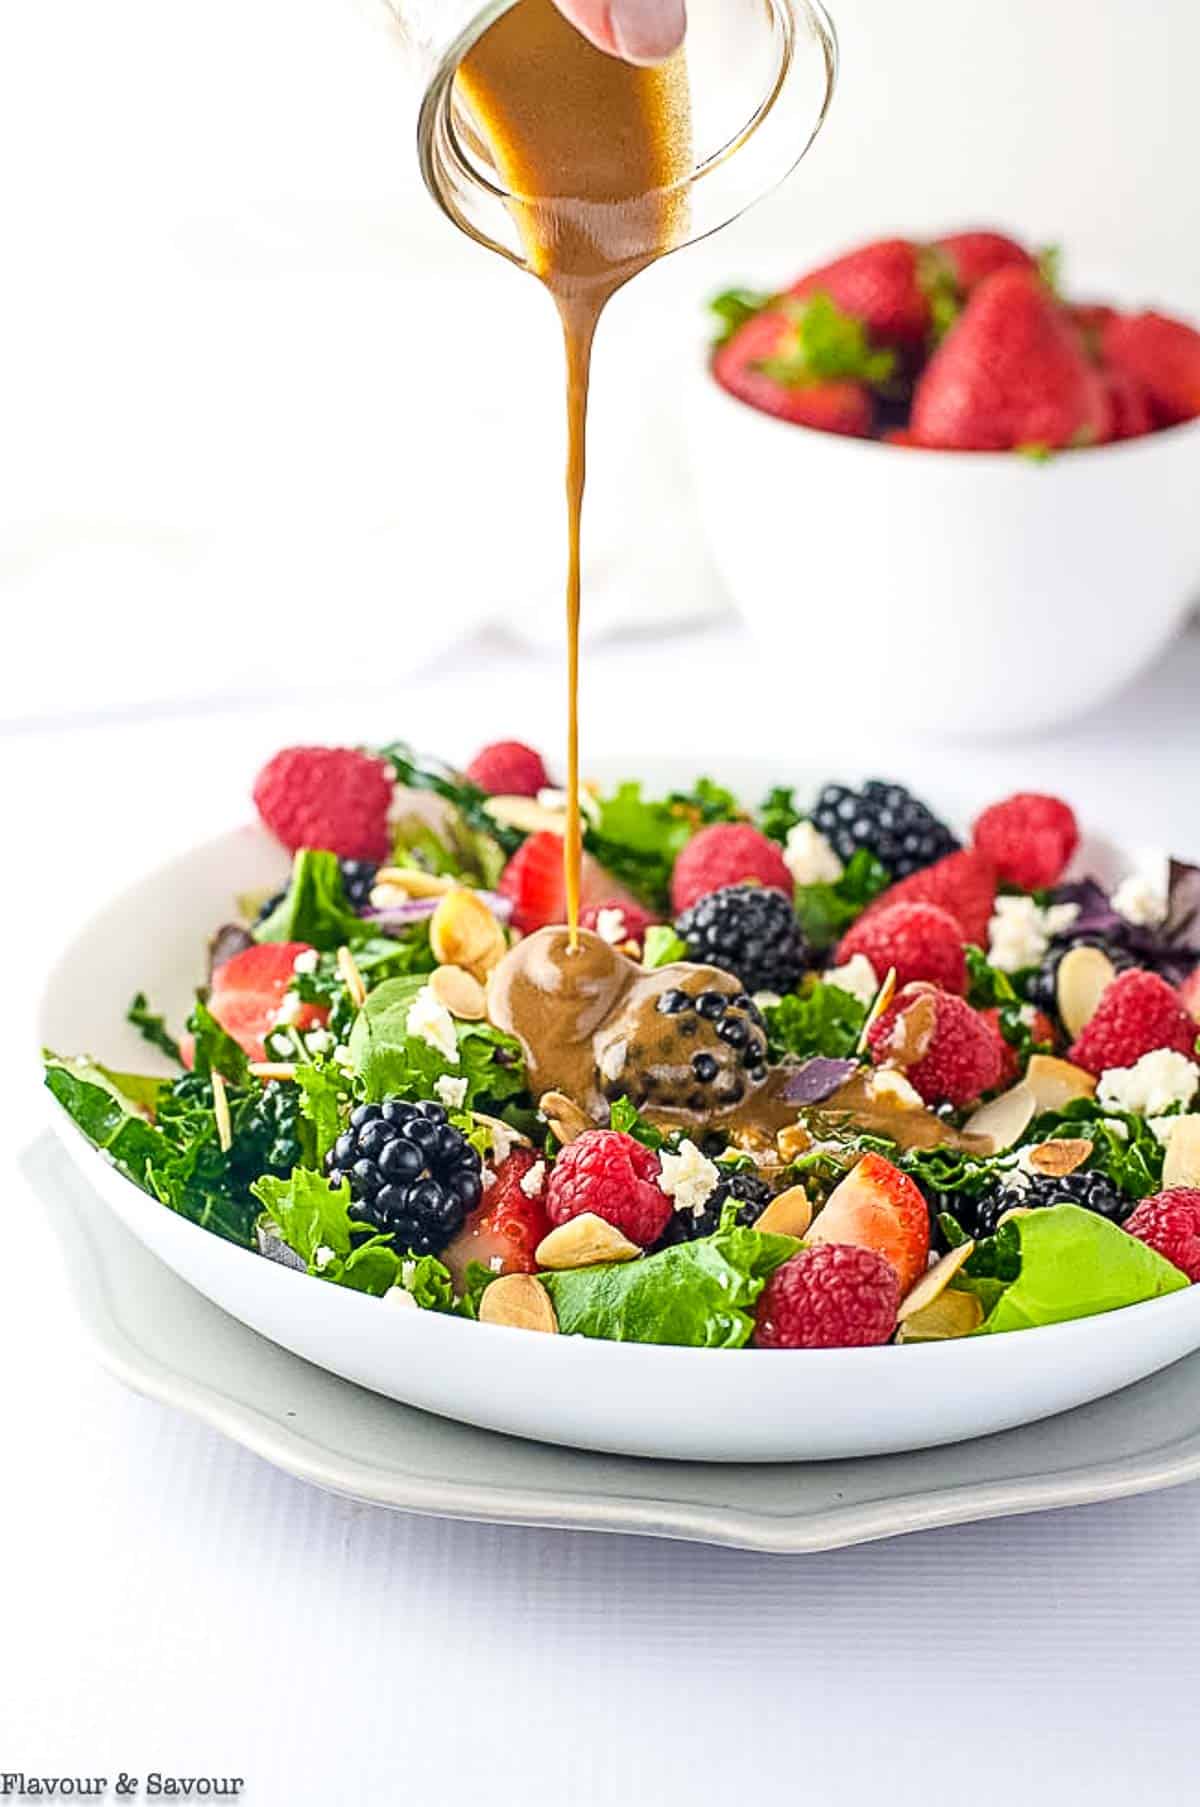 pouring balsamic dressing on mixed green salad with berries